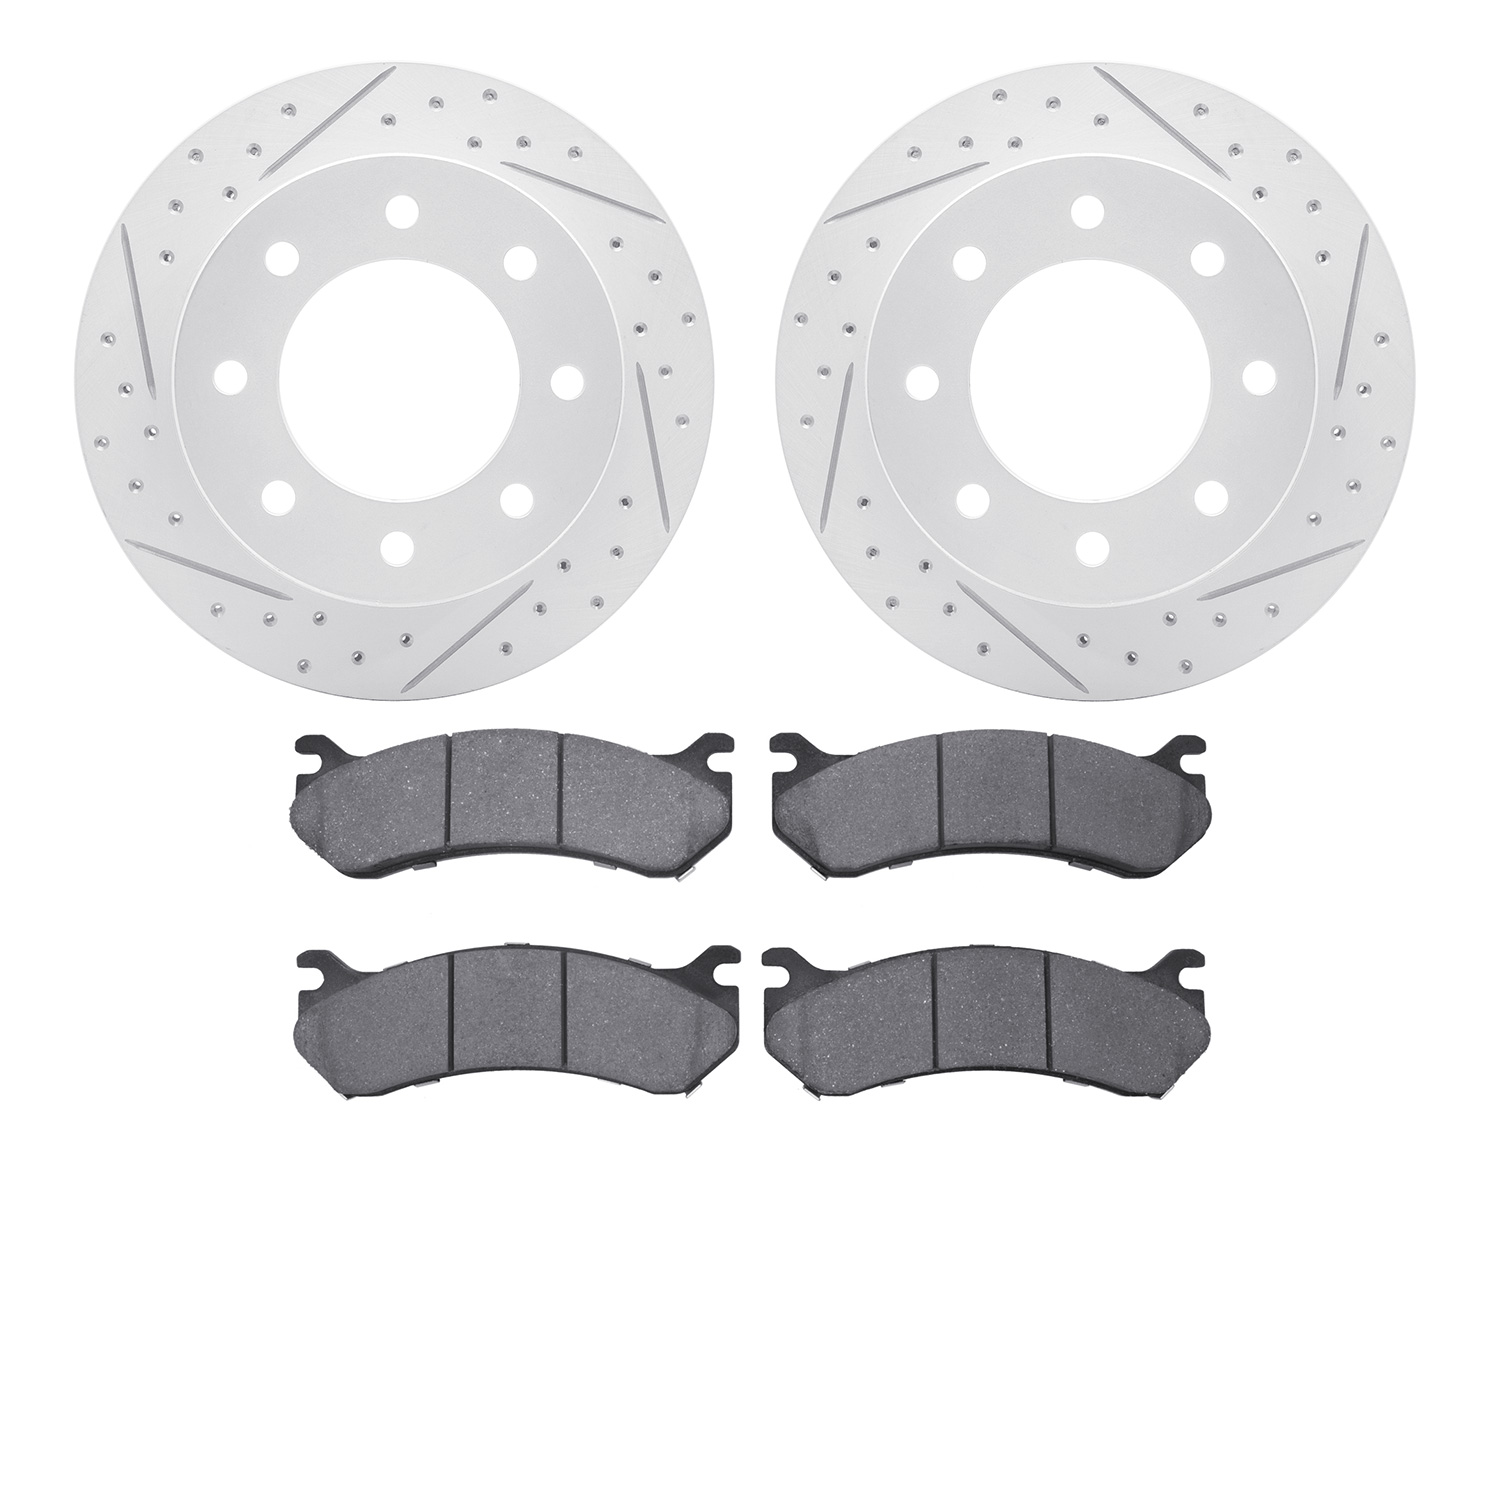 2202-48012 Geoperformance Drilled/Slotted Rotors w/Heavy-Duty Pads Kit, 1999-2009 GM, Position: Rear